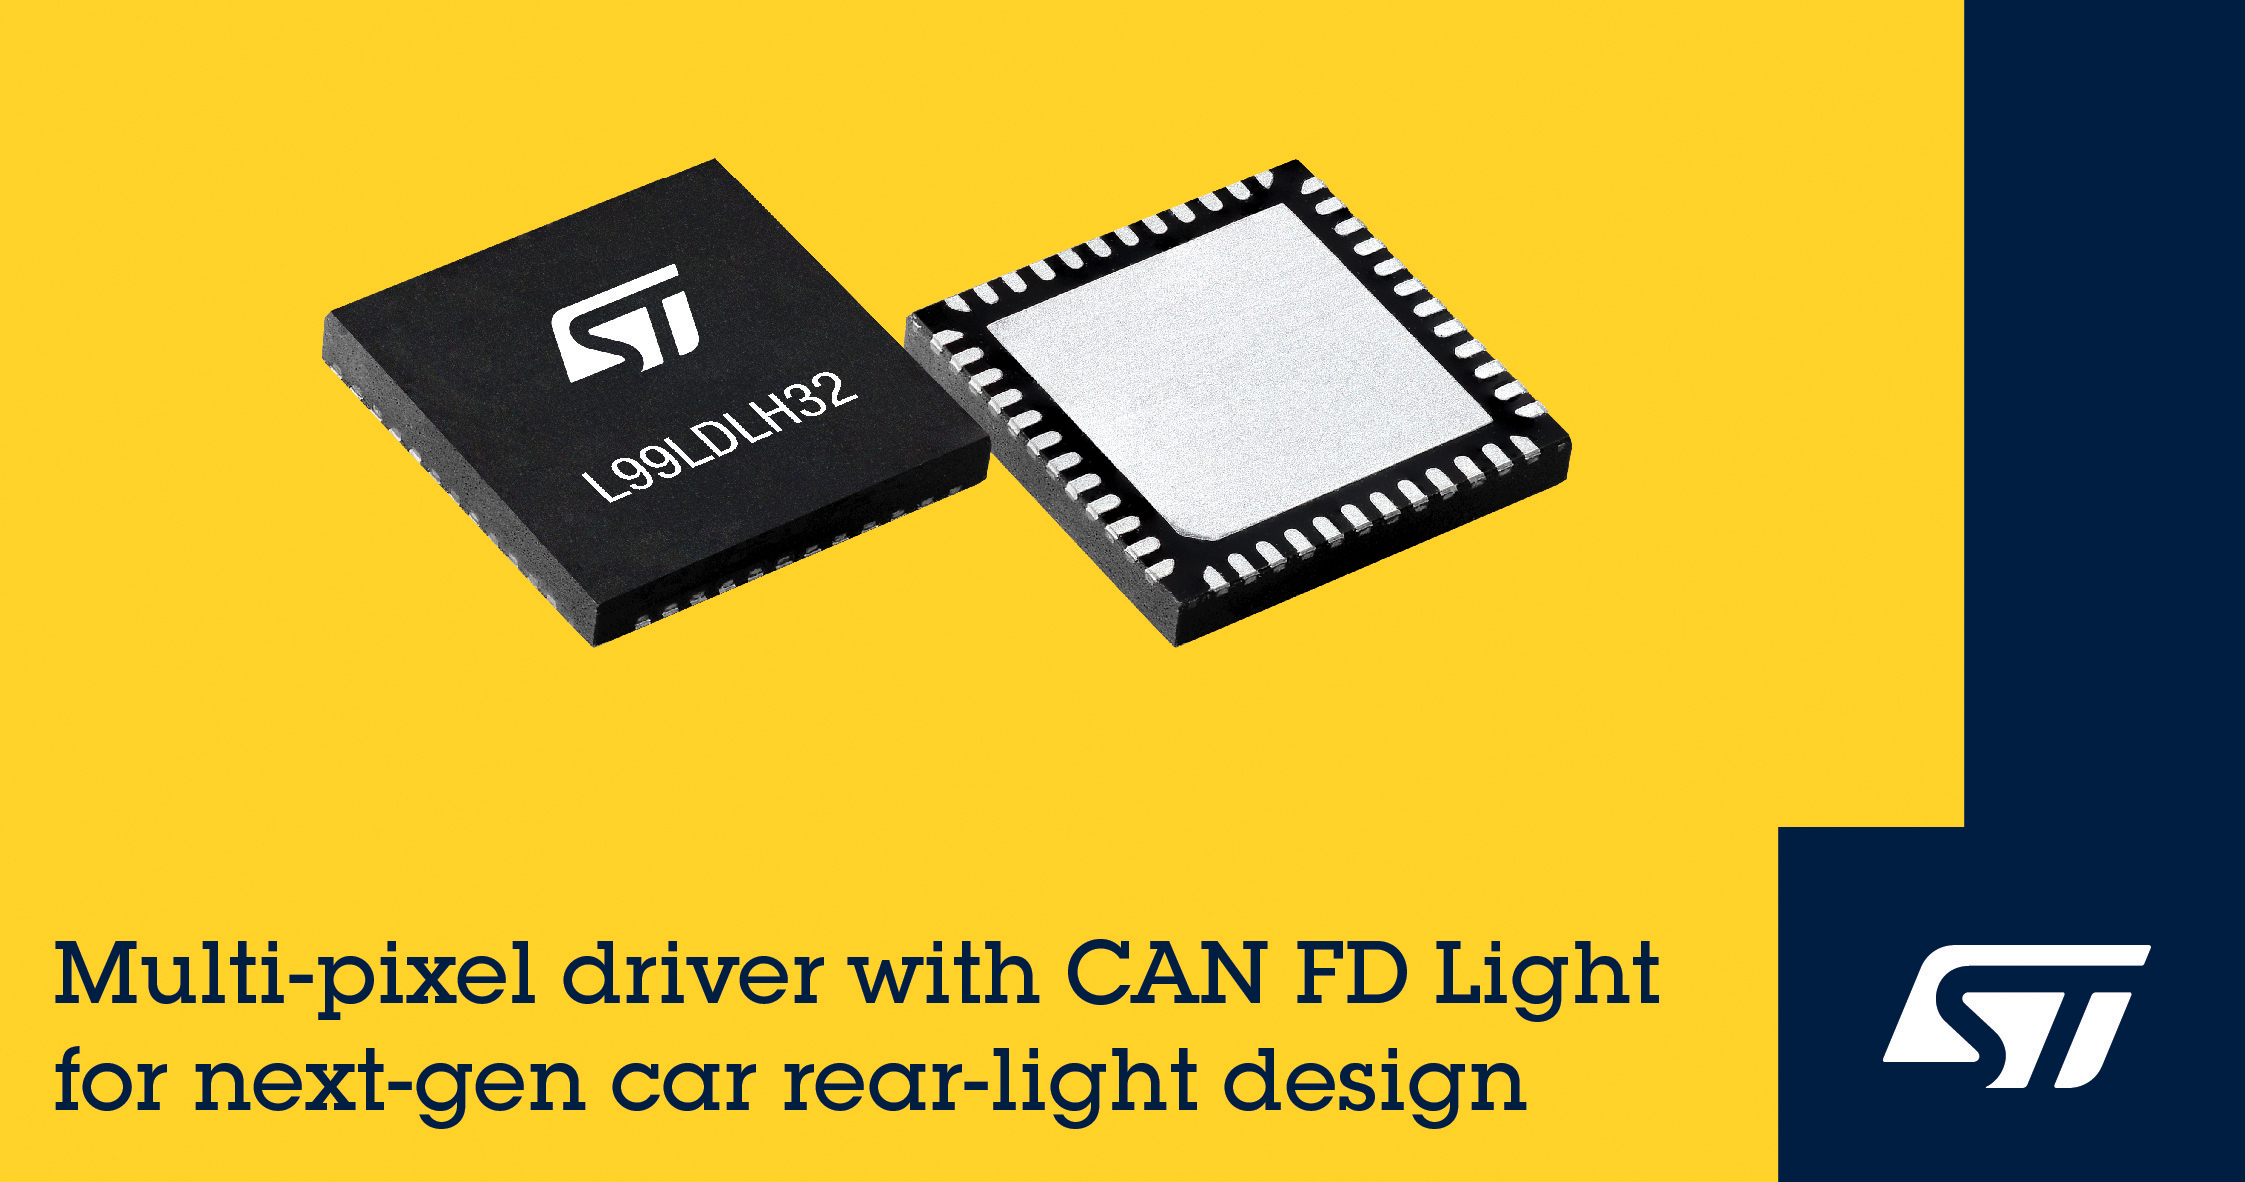 Multi-Pixel Driver with CAN FD Light Powers Next-Generation Automotive Lighting